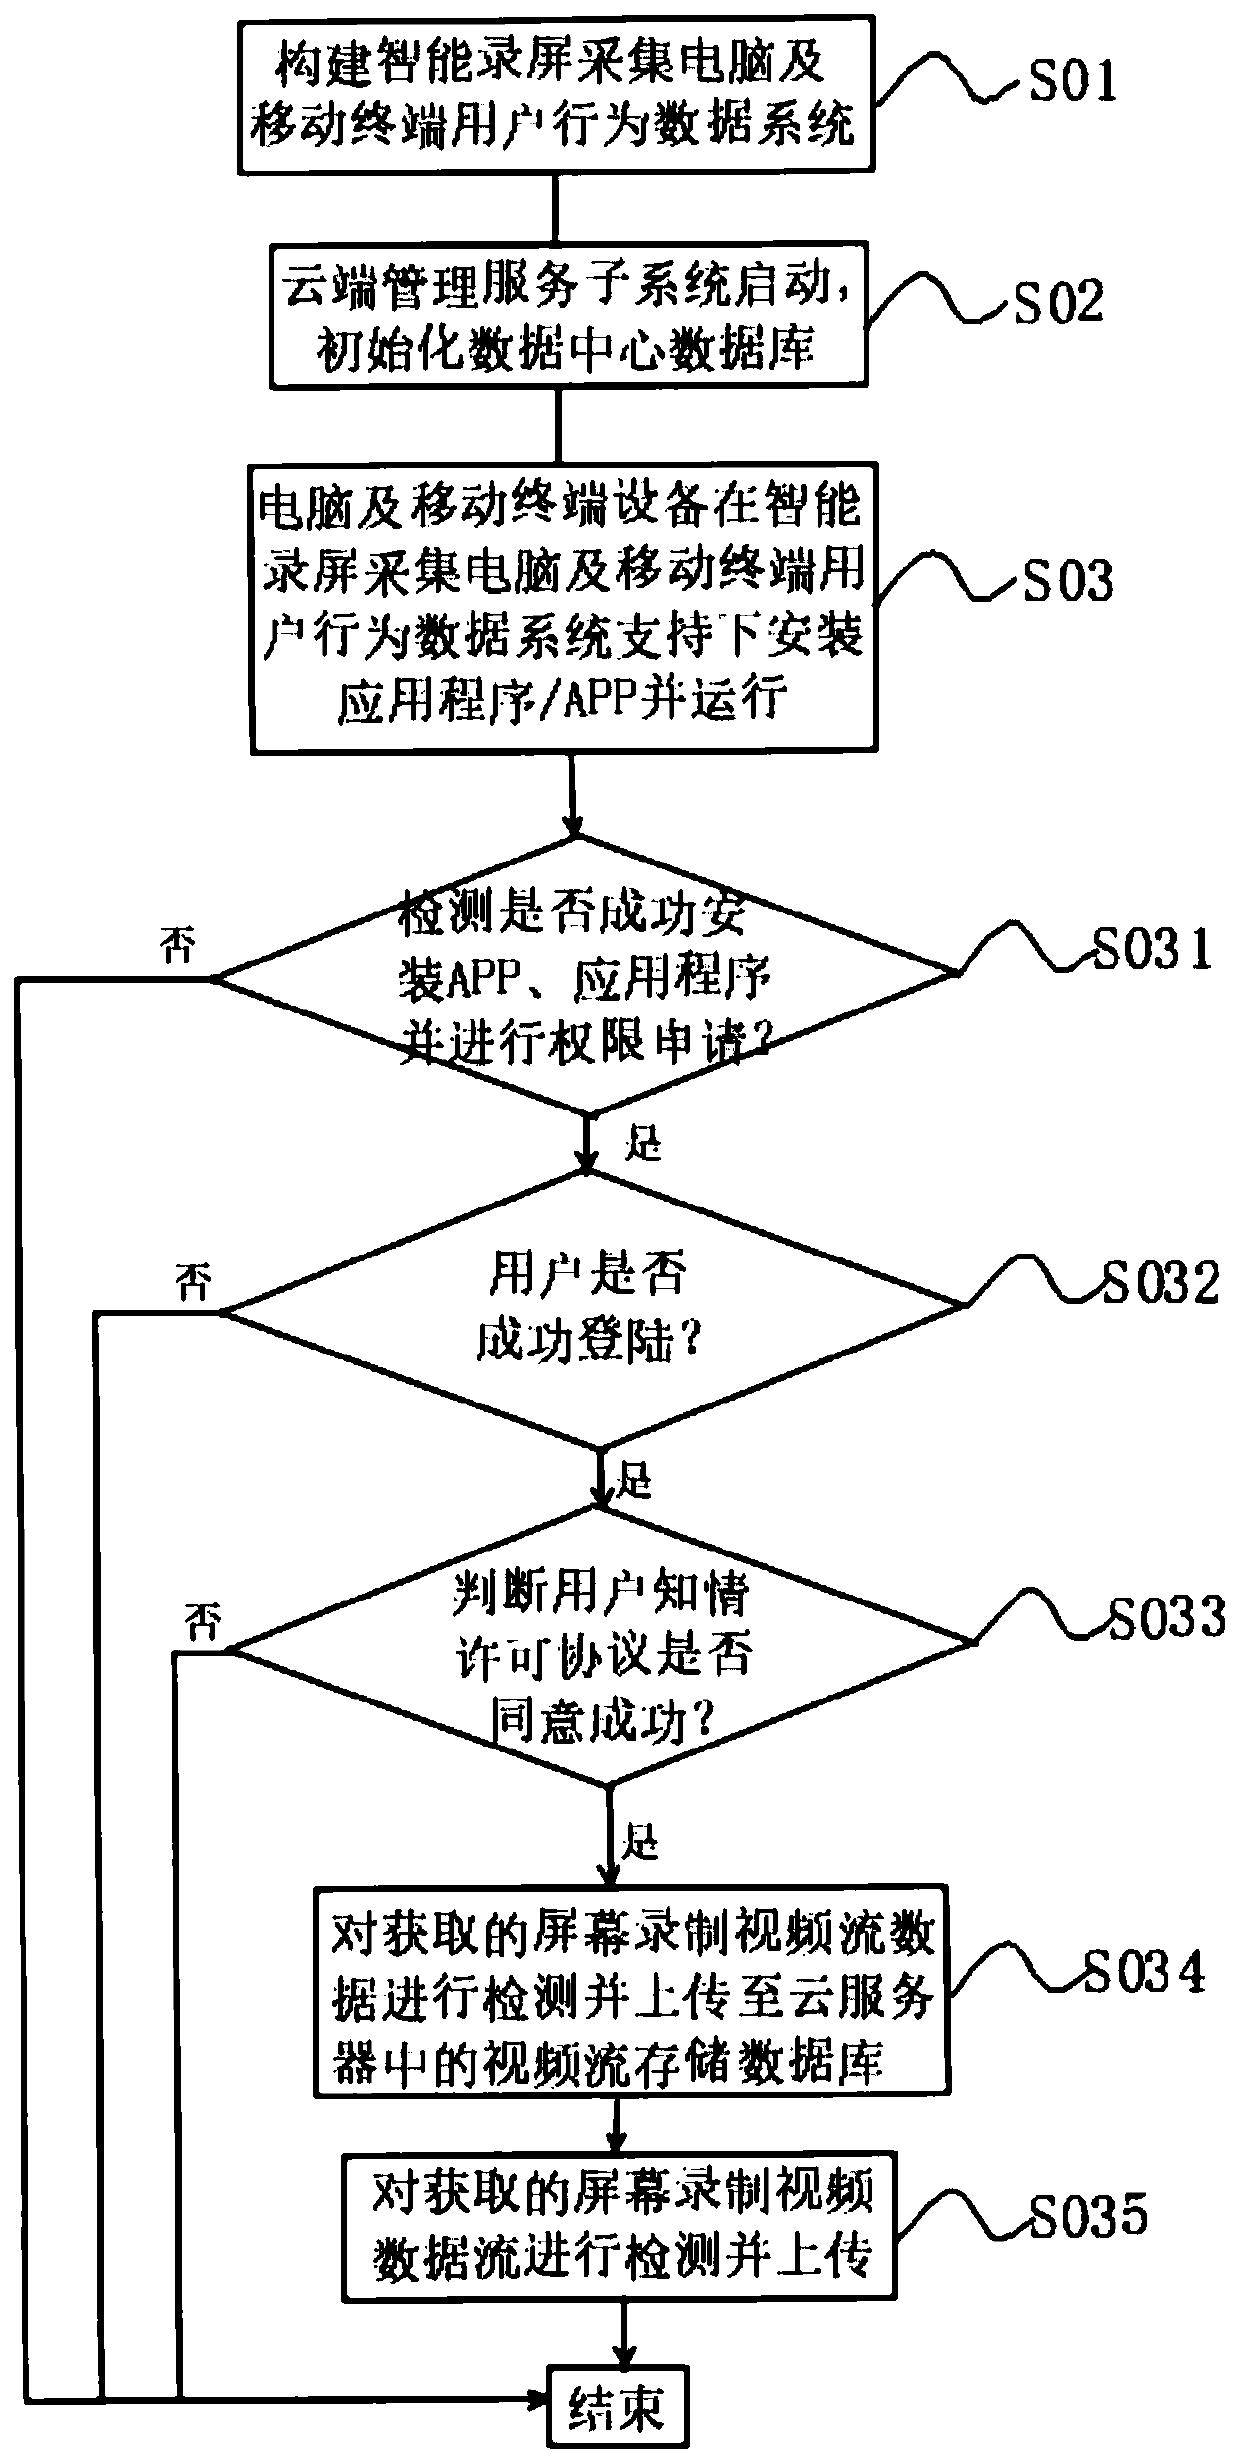 Method for collecting computer and mobile terminal user behavior data through intelligent screen recording